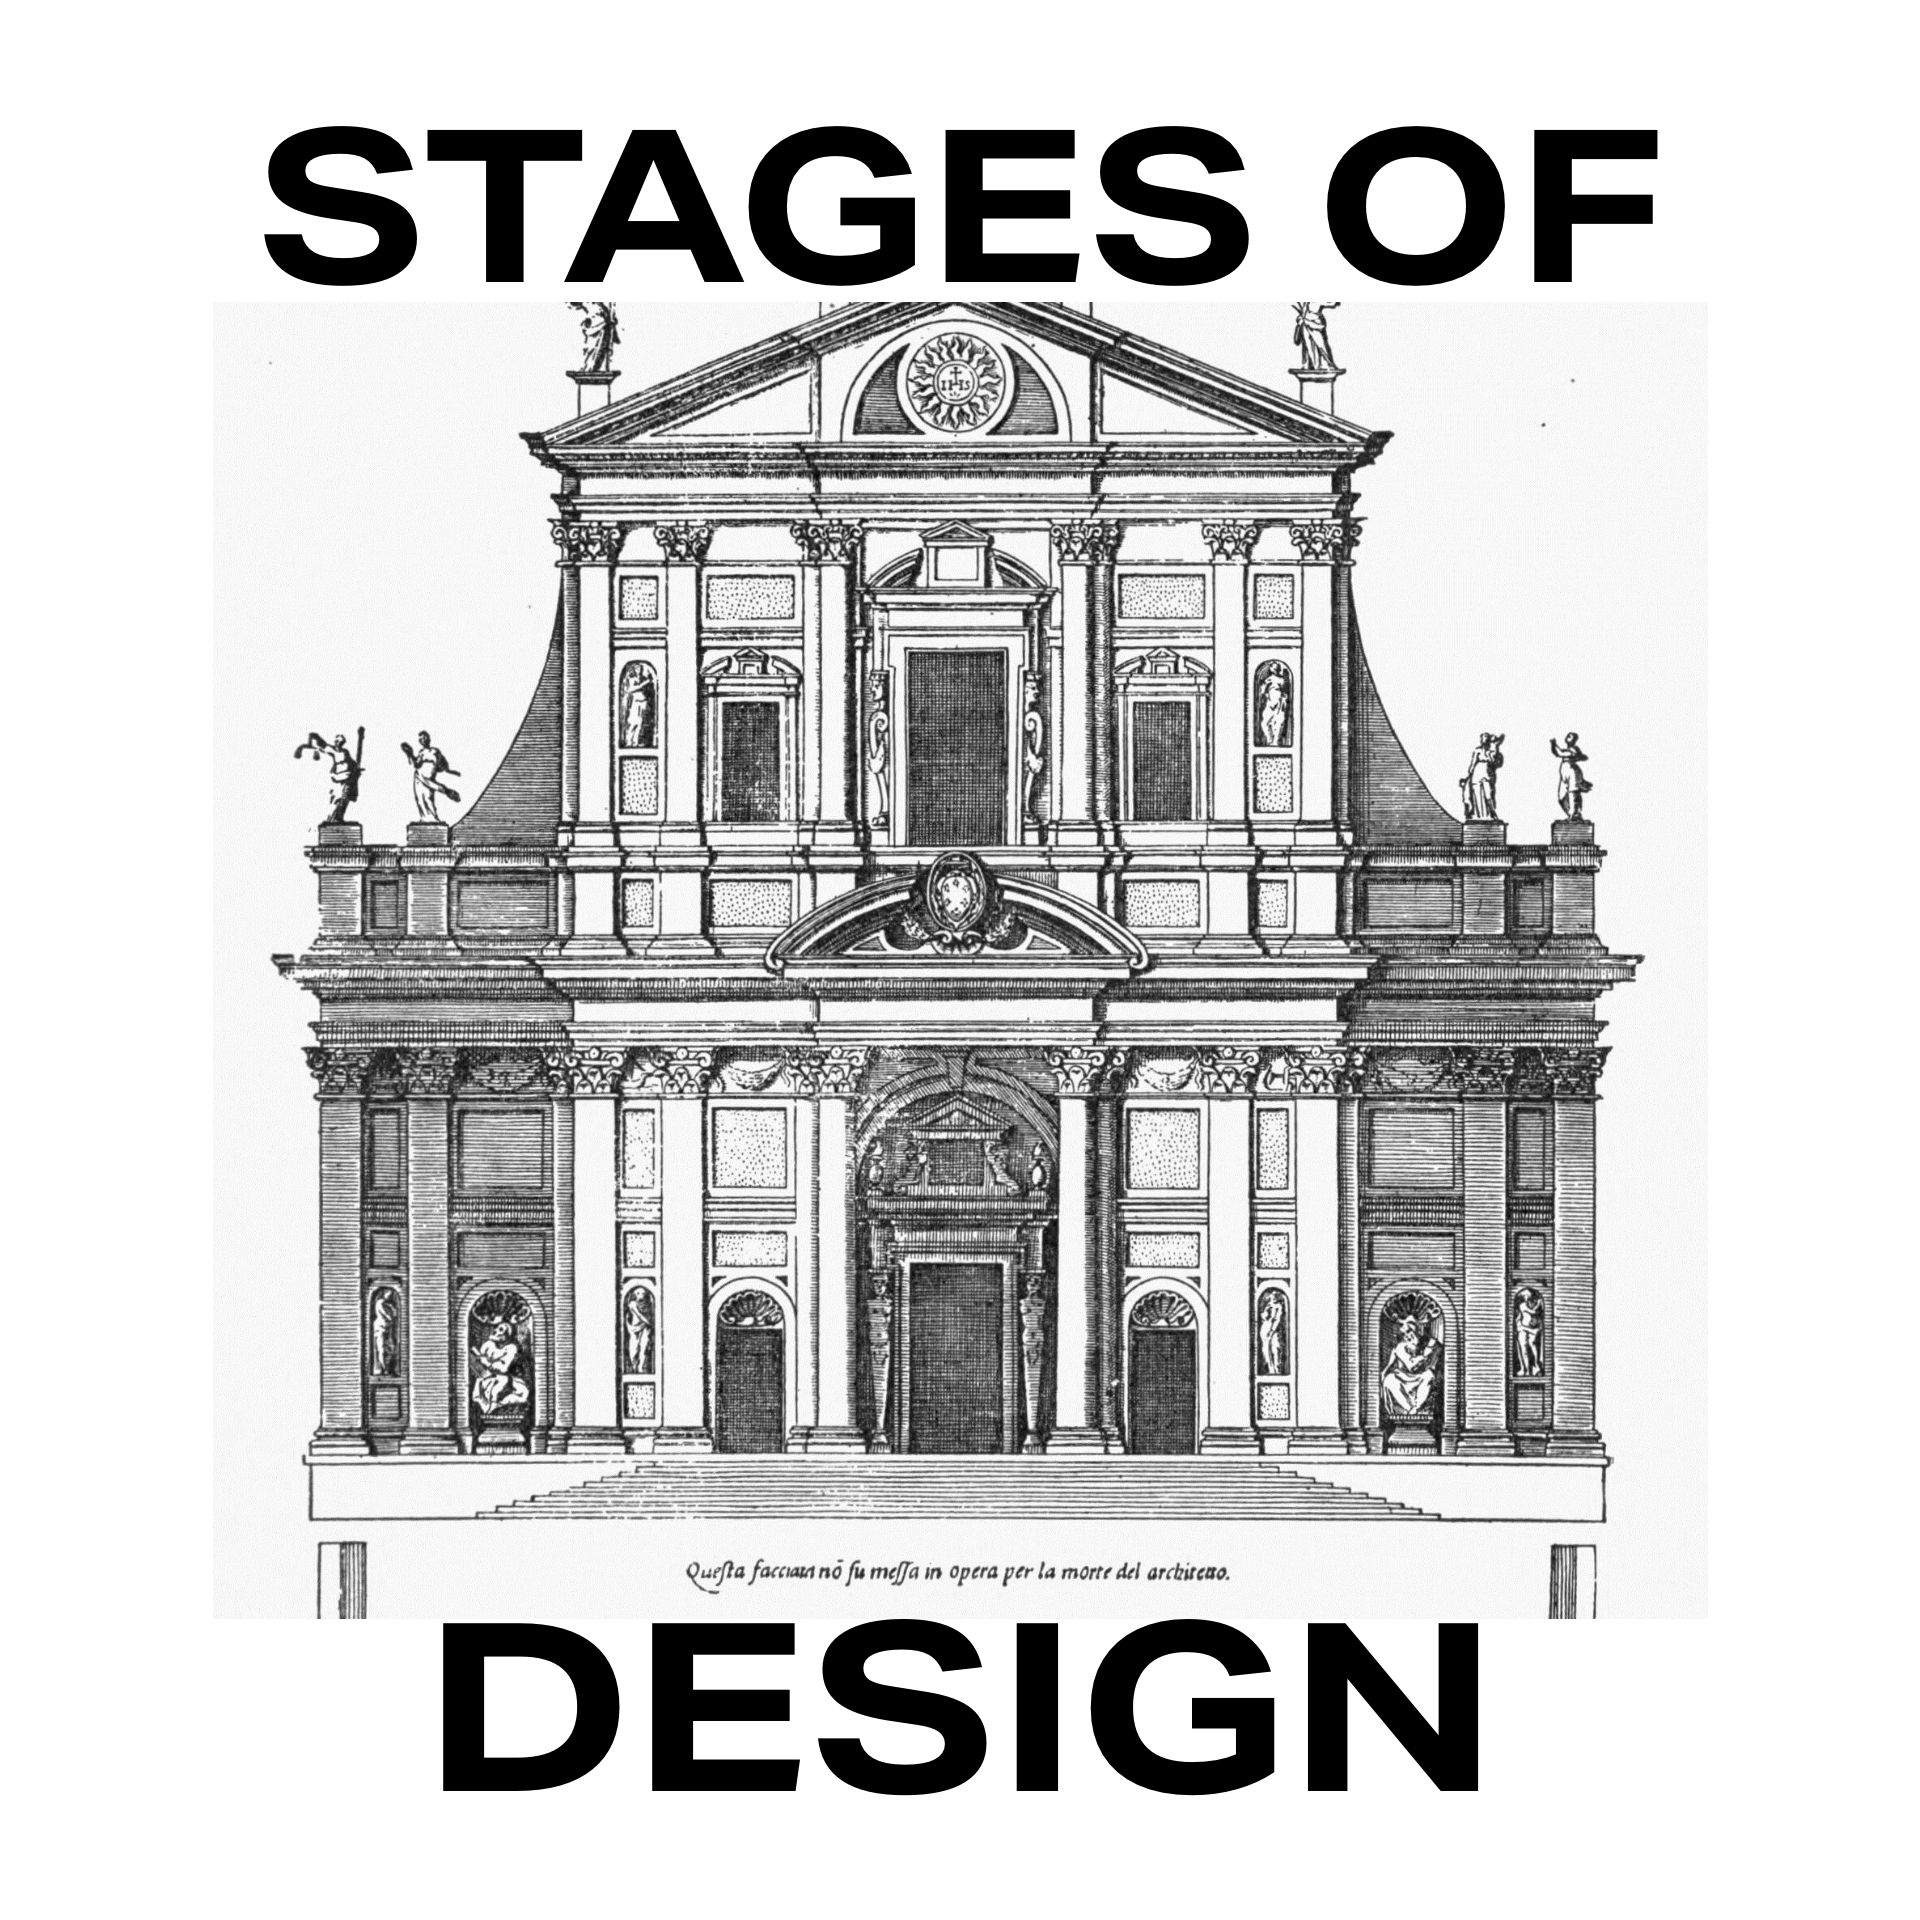 Stages of Design